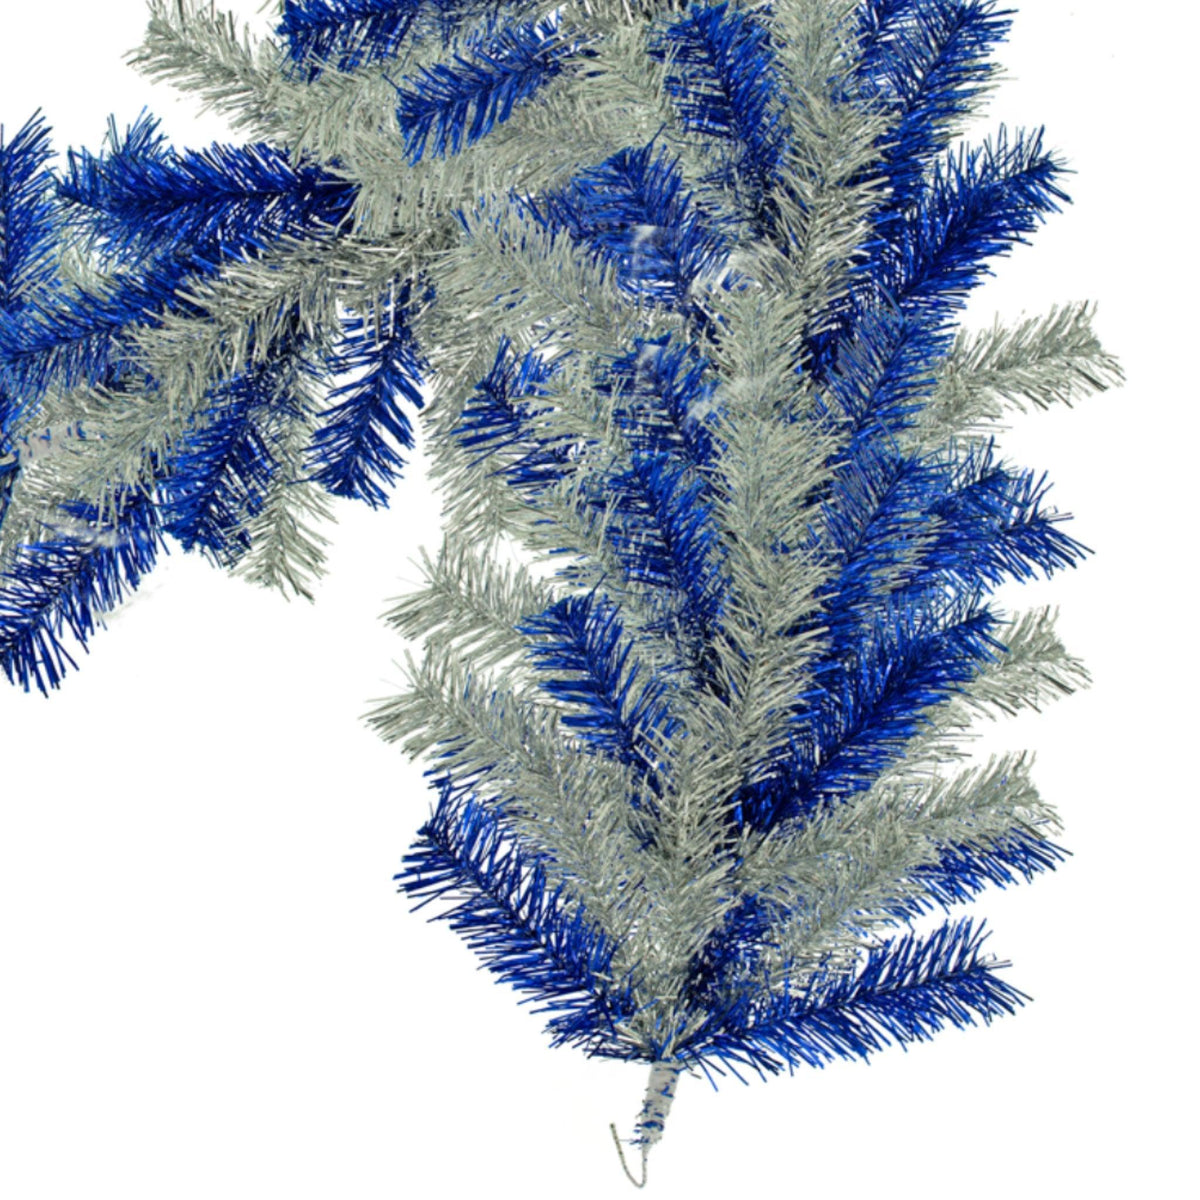 Bottom section of Lee Display's 6FT Long Blue and Silver Tinsel Christmas Brush Garland.  Available now at leedisplay.com